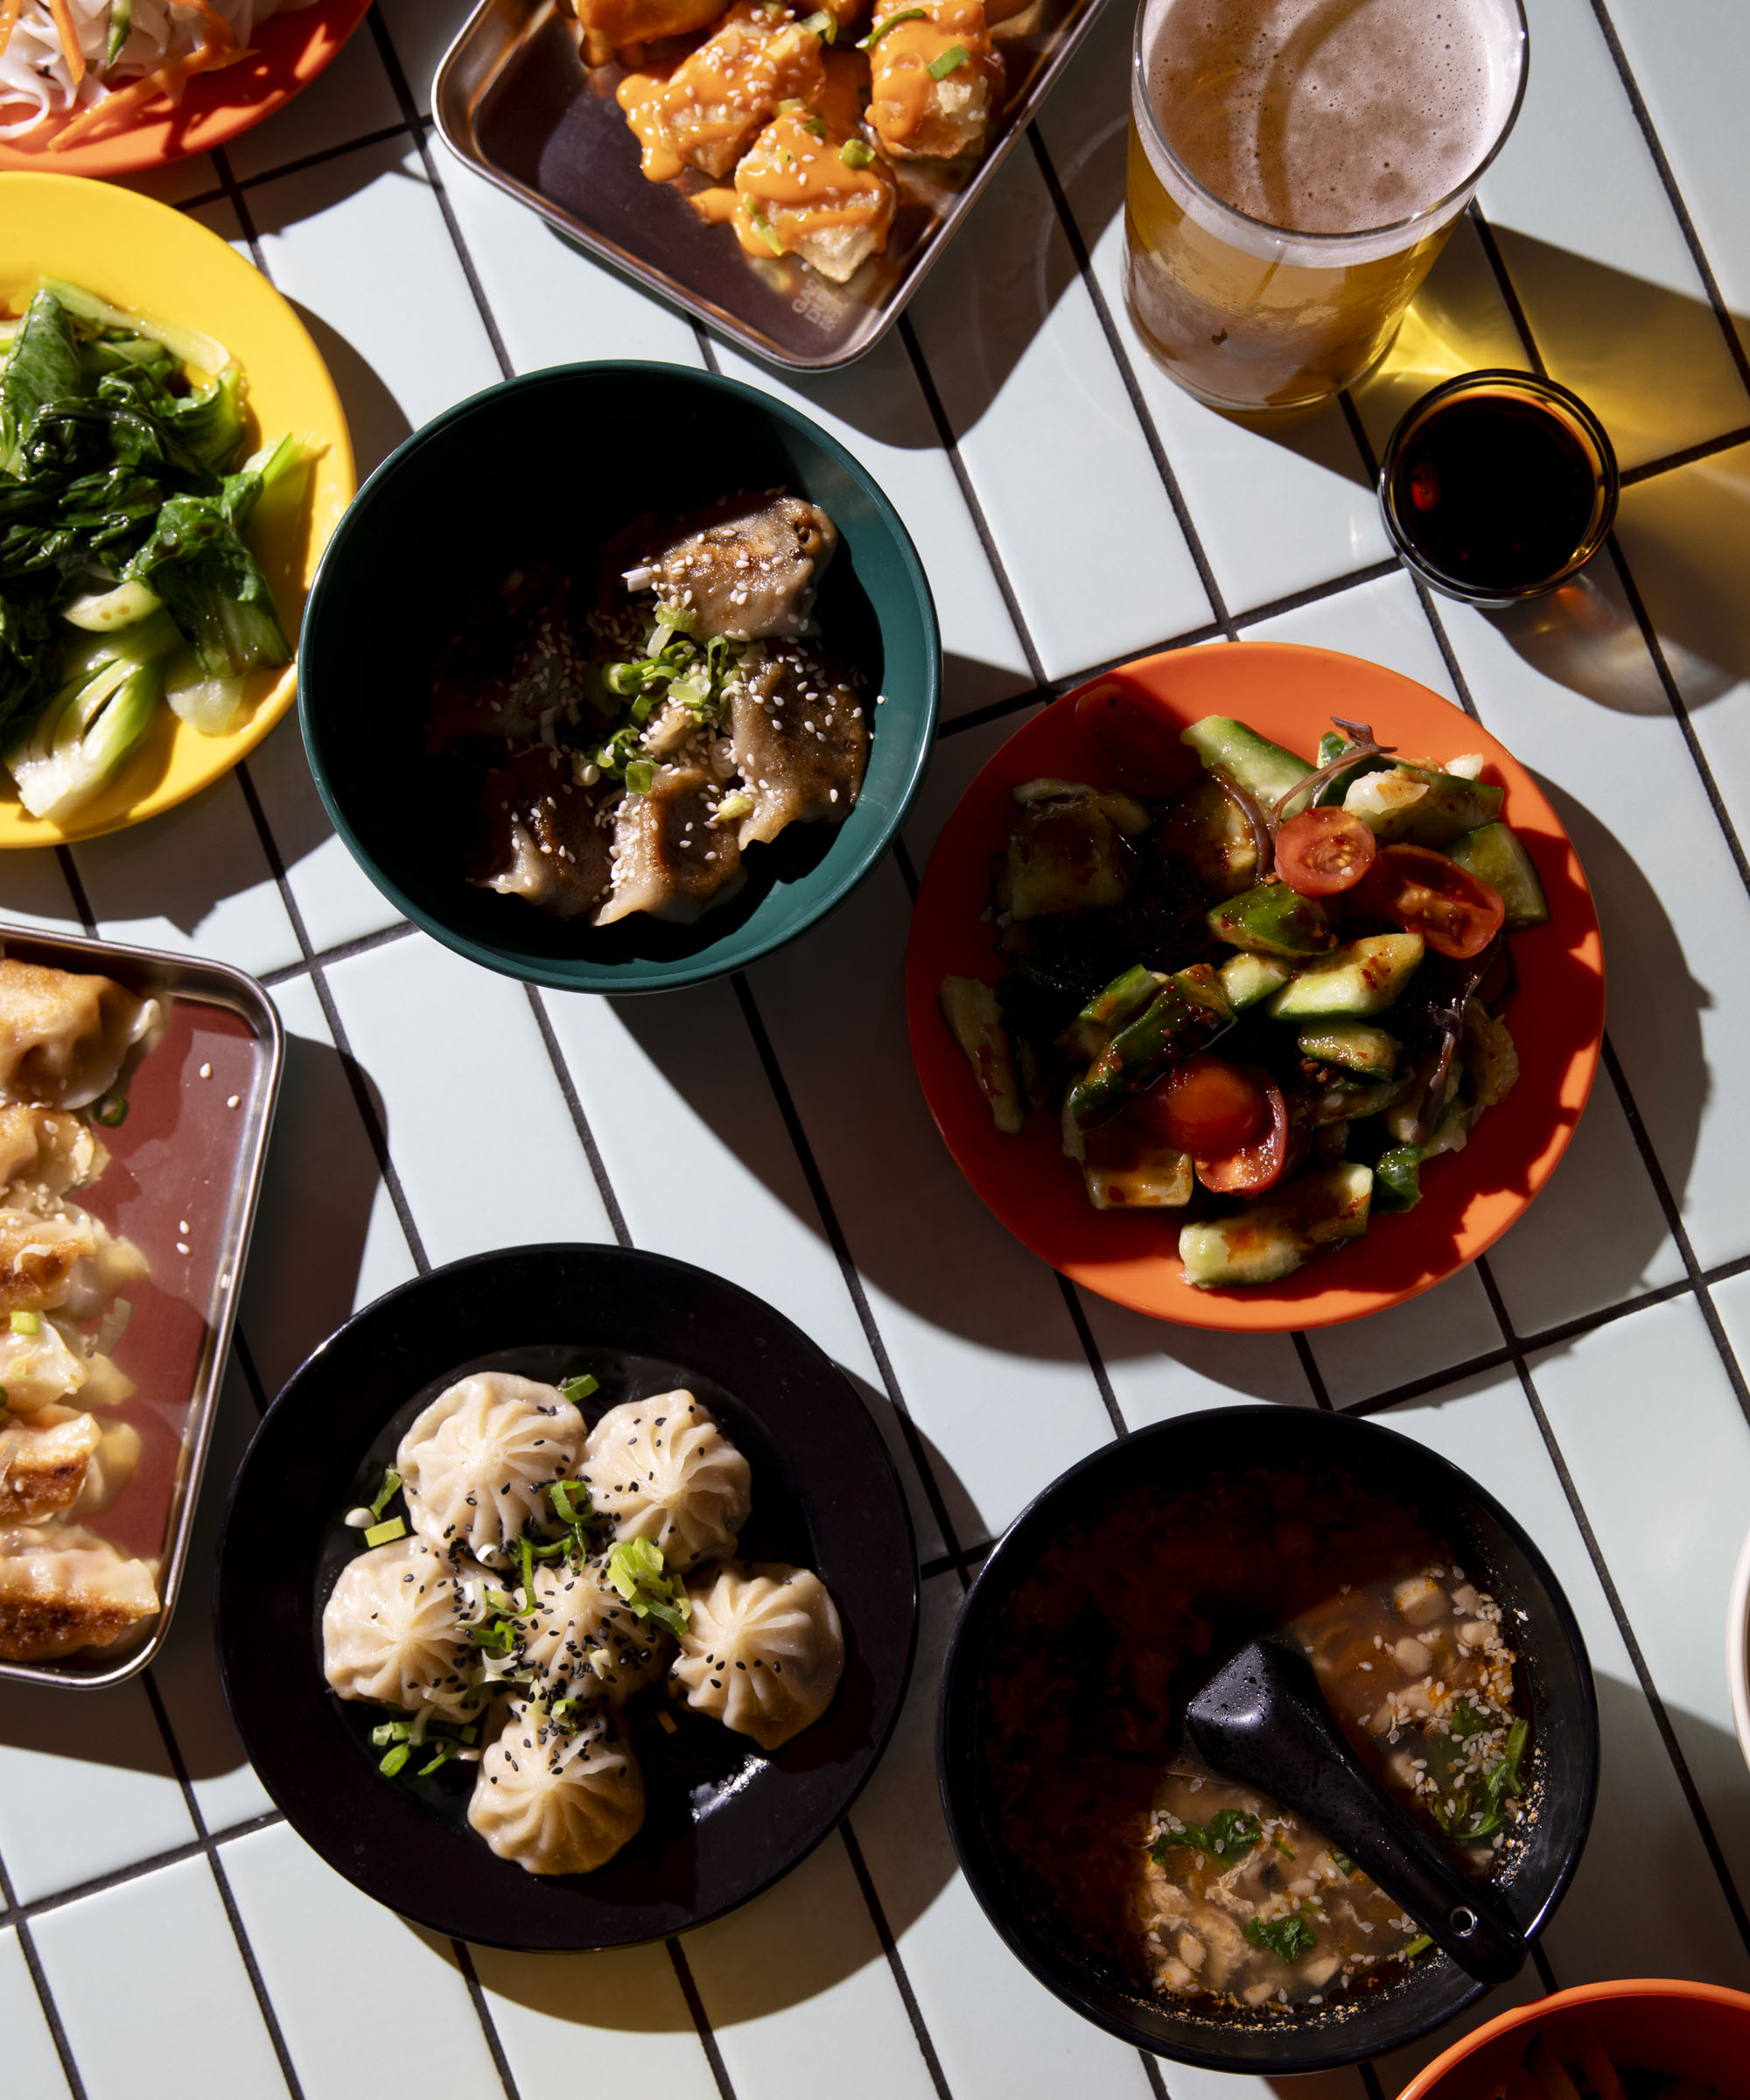 Pick whatever you like at GAO in Østerbro – Slinging Hong Kong-inspired eats since 2016 and still a steaming hot dumpling destination